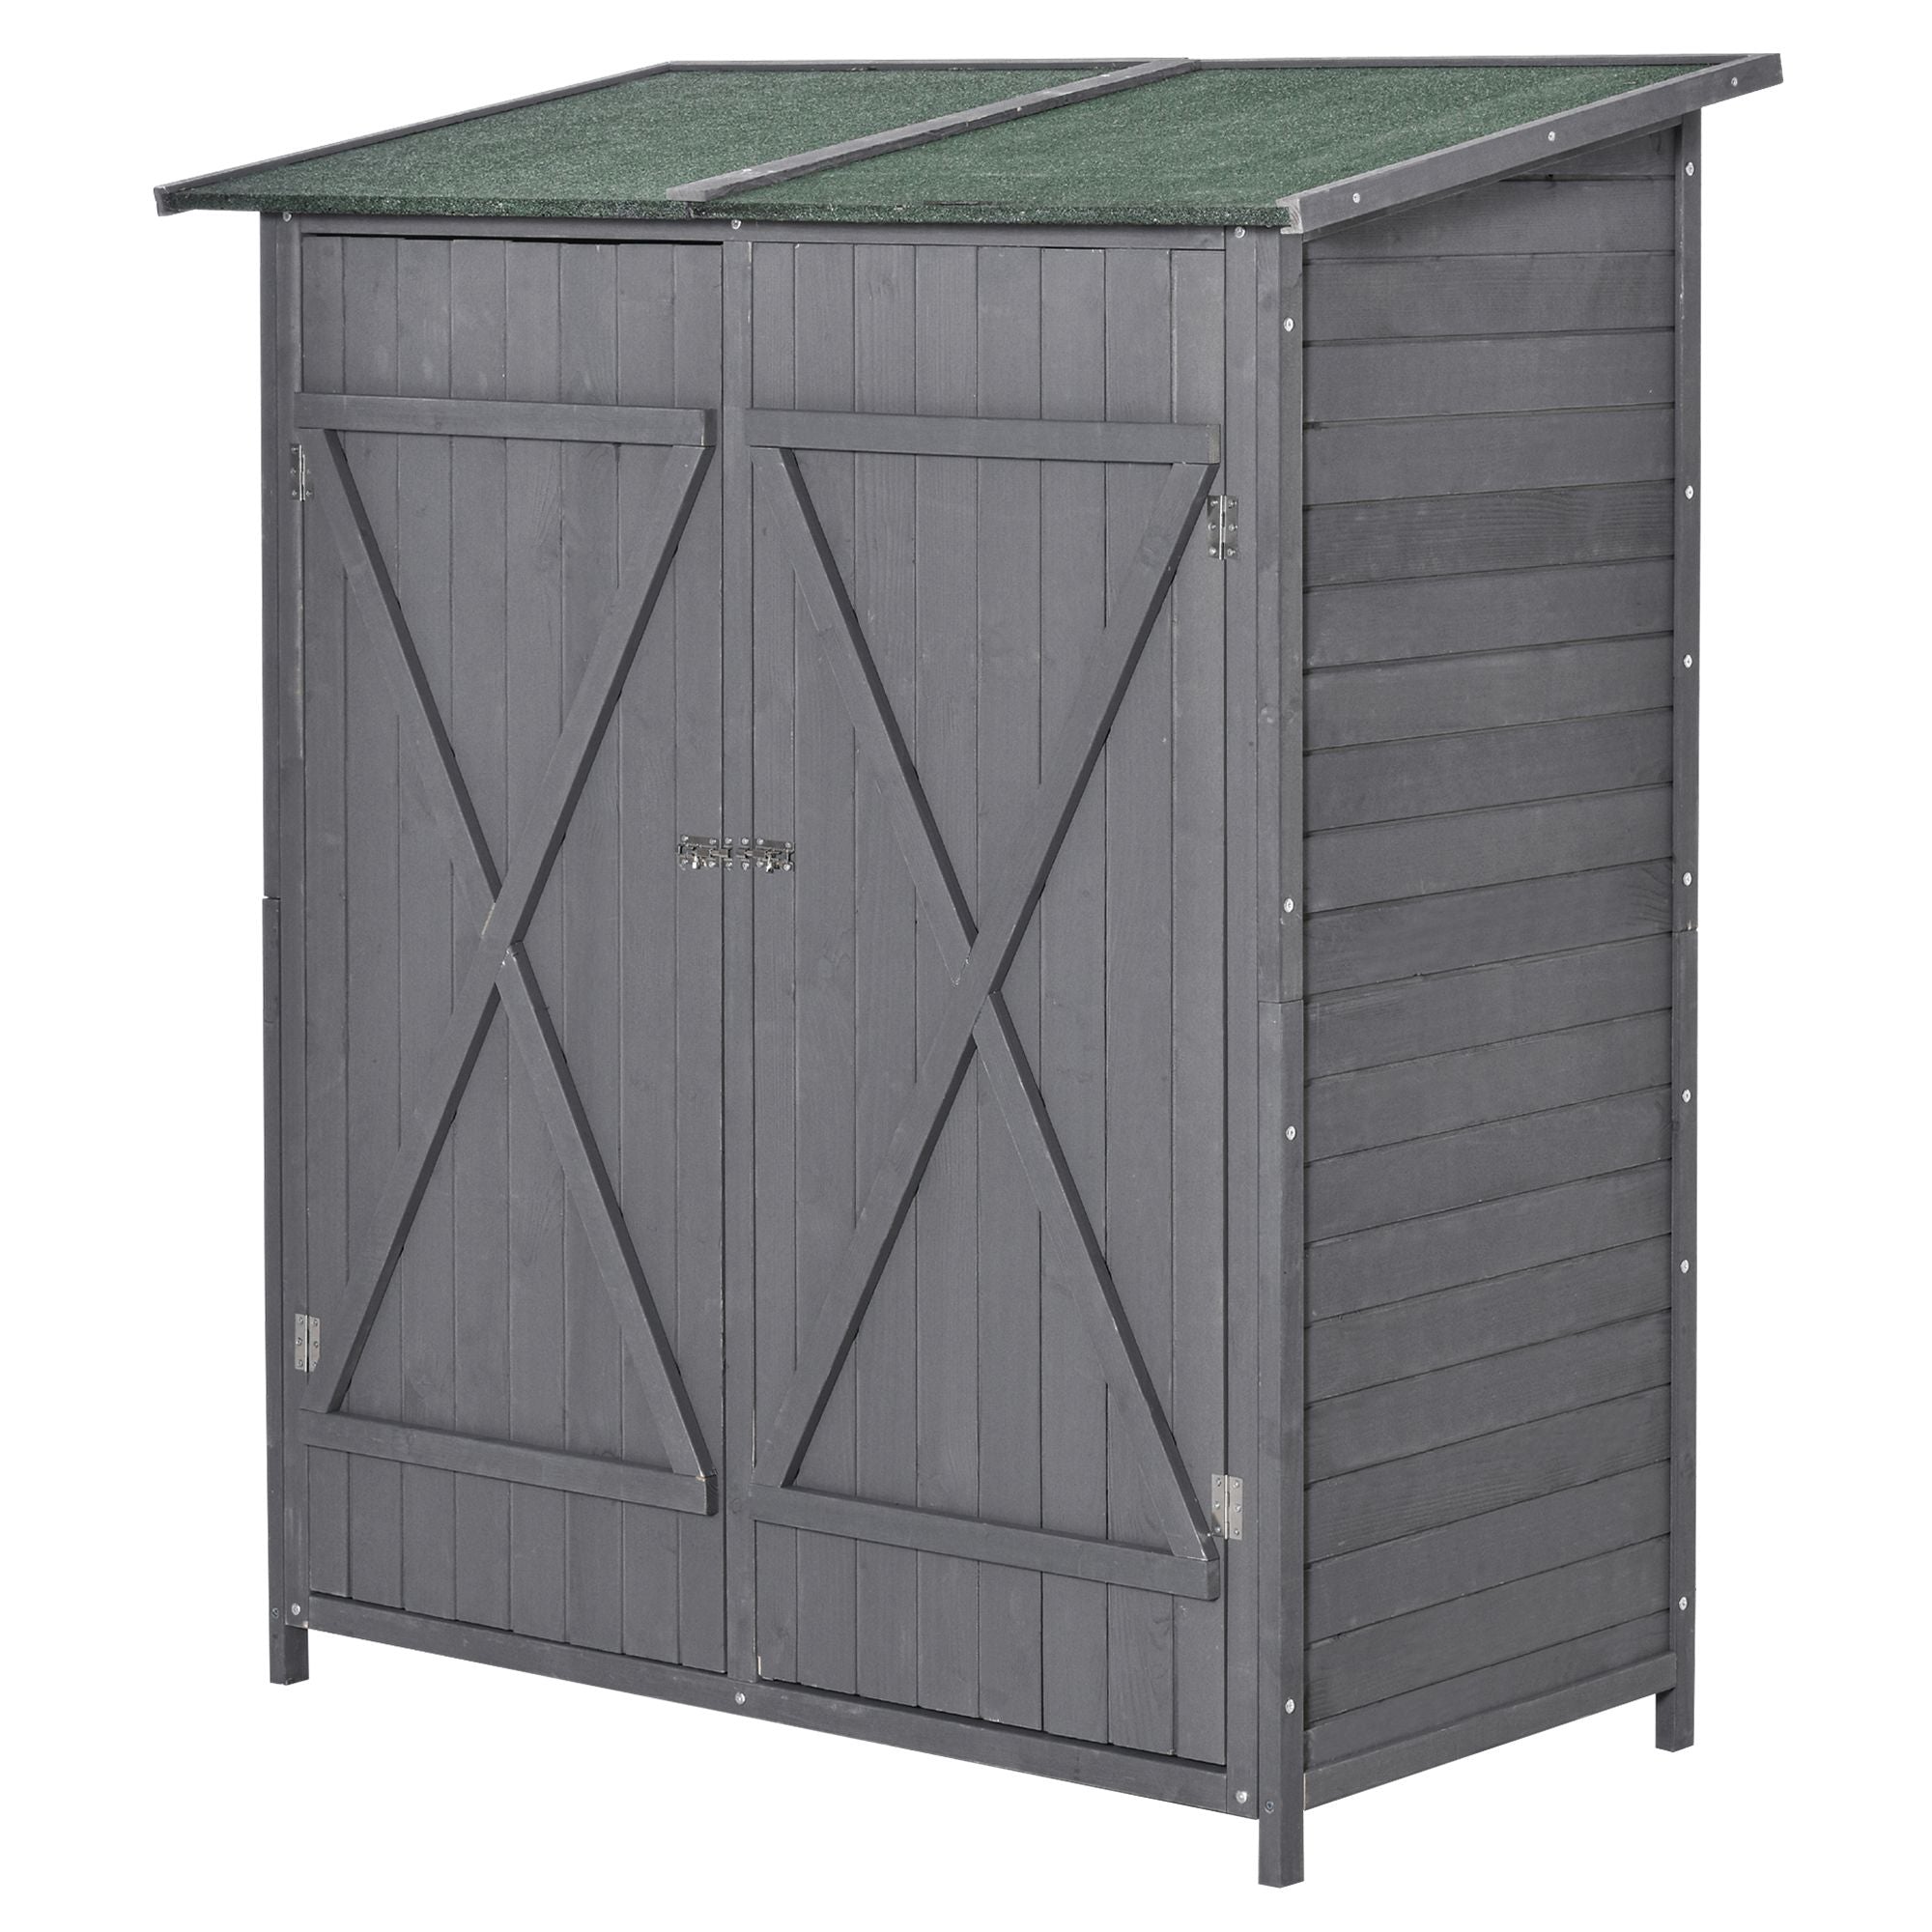 Outsunny Wooden Garden Storage Shed Lockable Tool Cabinet Organizer w/ Storage Table, Double Door, 139 x 75 x 160 cm, Grey - Inspirely